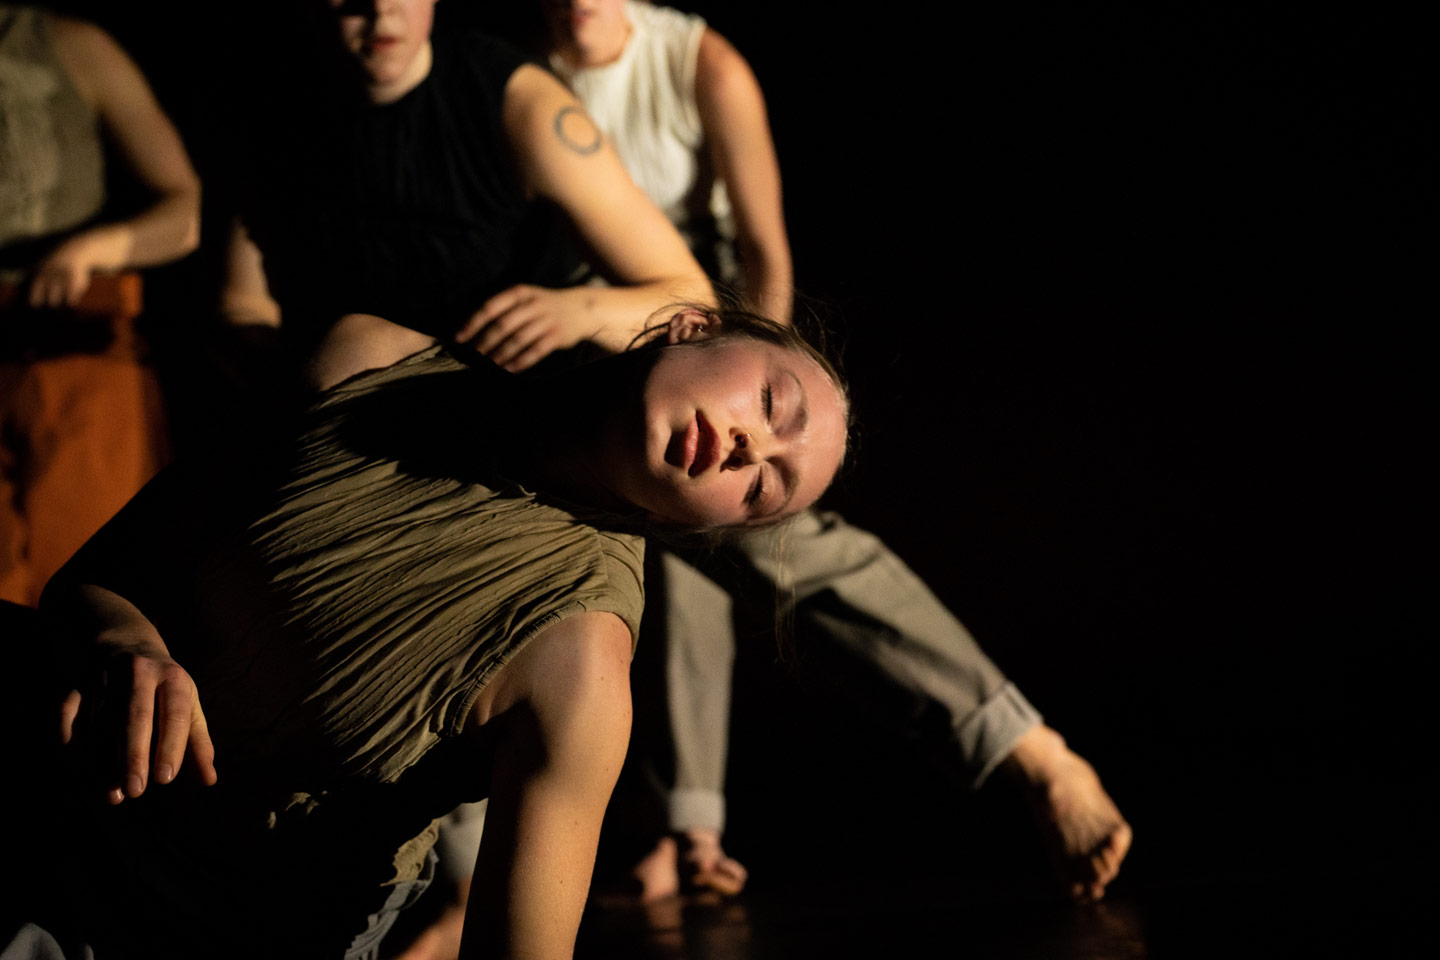 push/FOLD dancer Maile Crowder performing the world-premiere of 'Illum' at the Patricia Reser Center for the Arts in Beaverton, Oregon | Photo taken by: Ophélia Martin-Weber